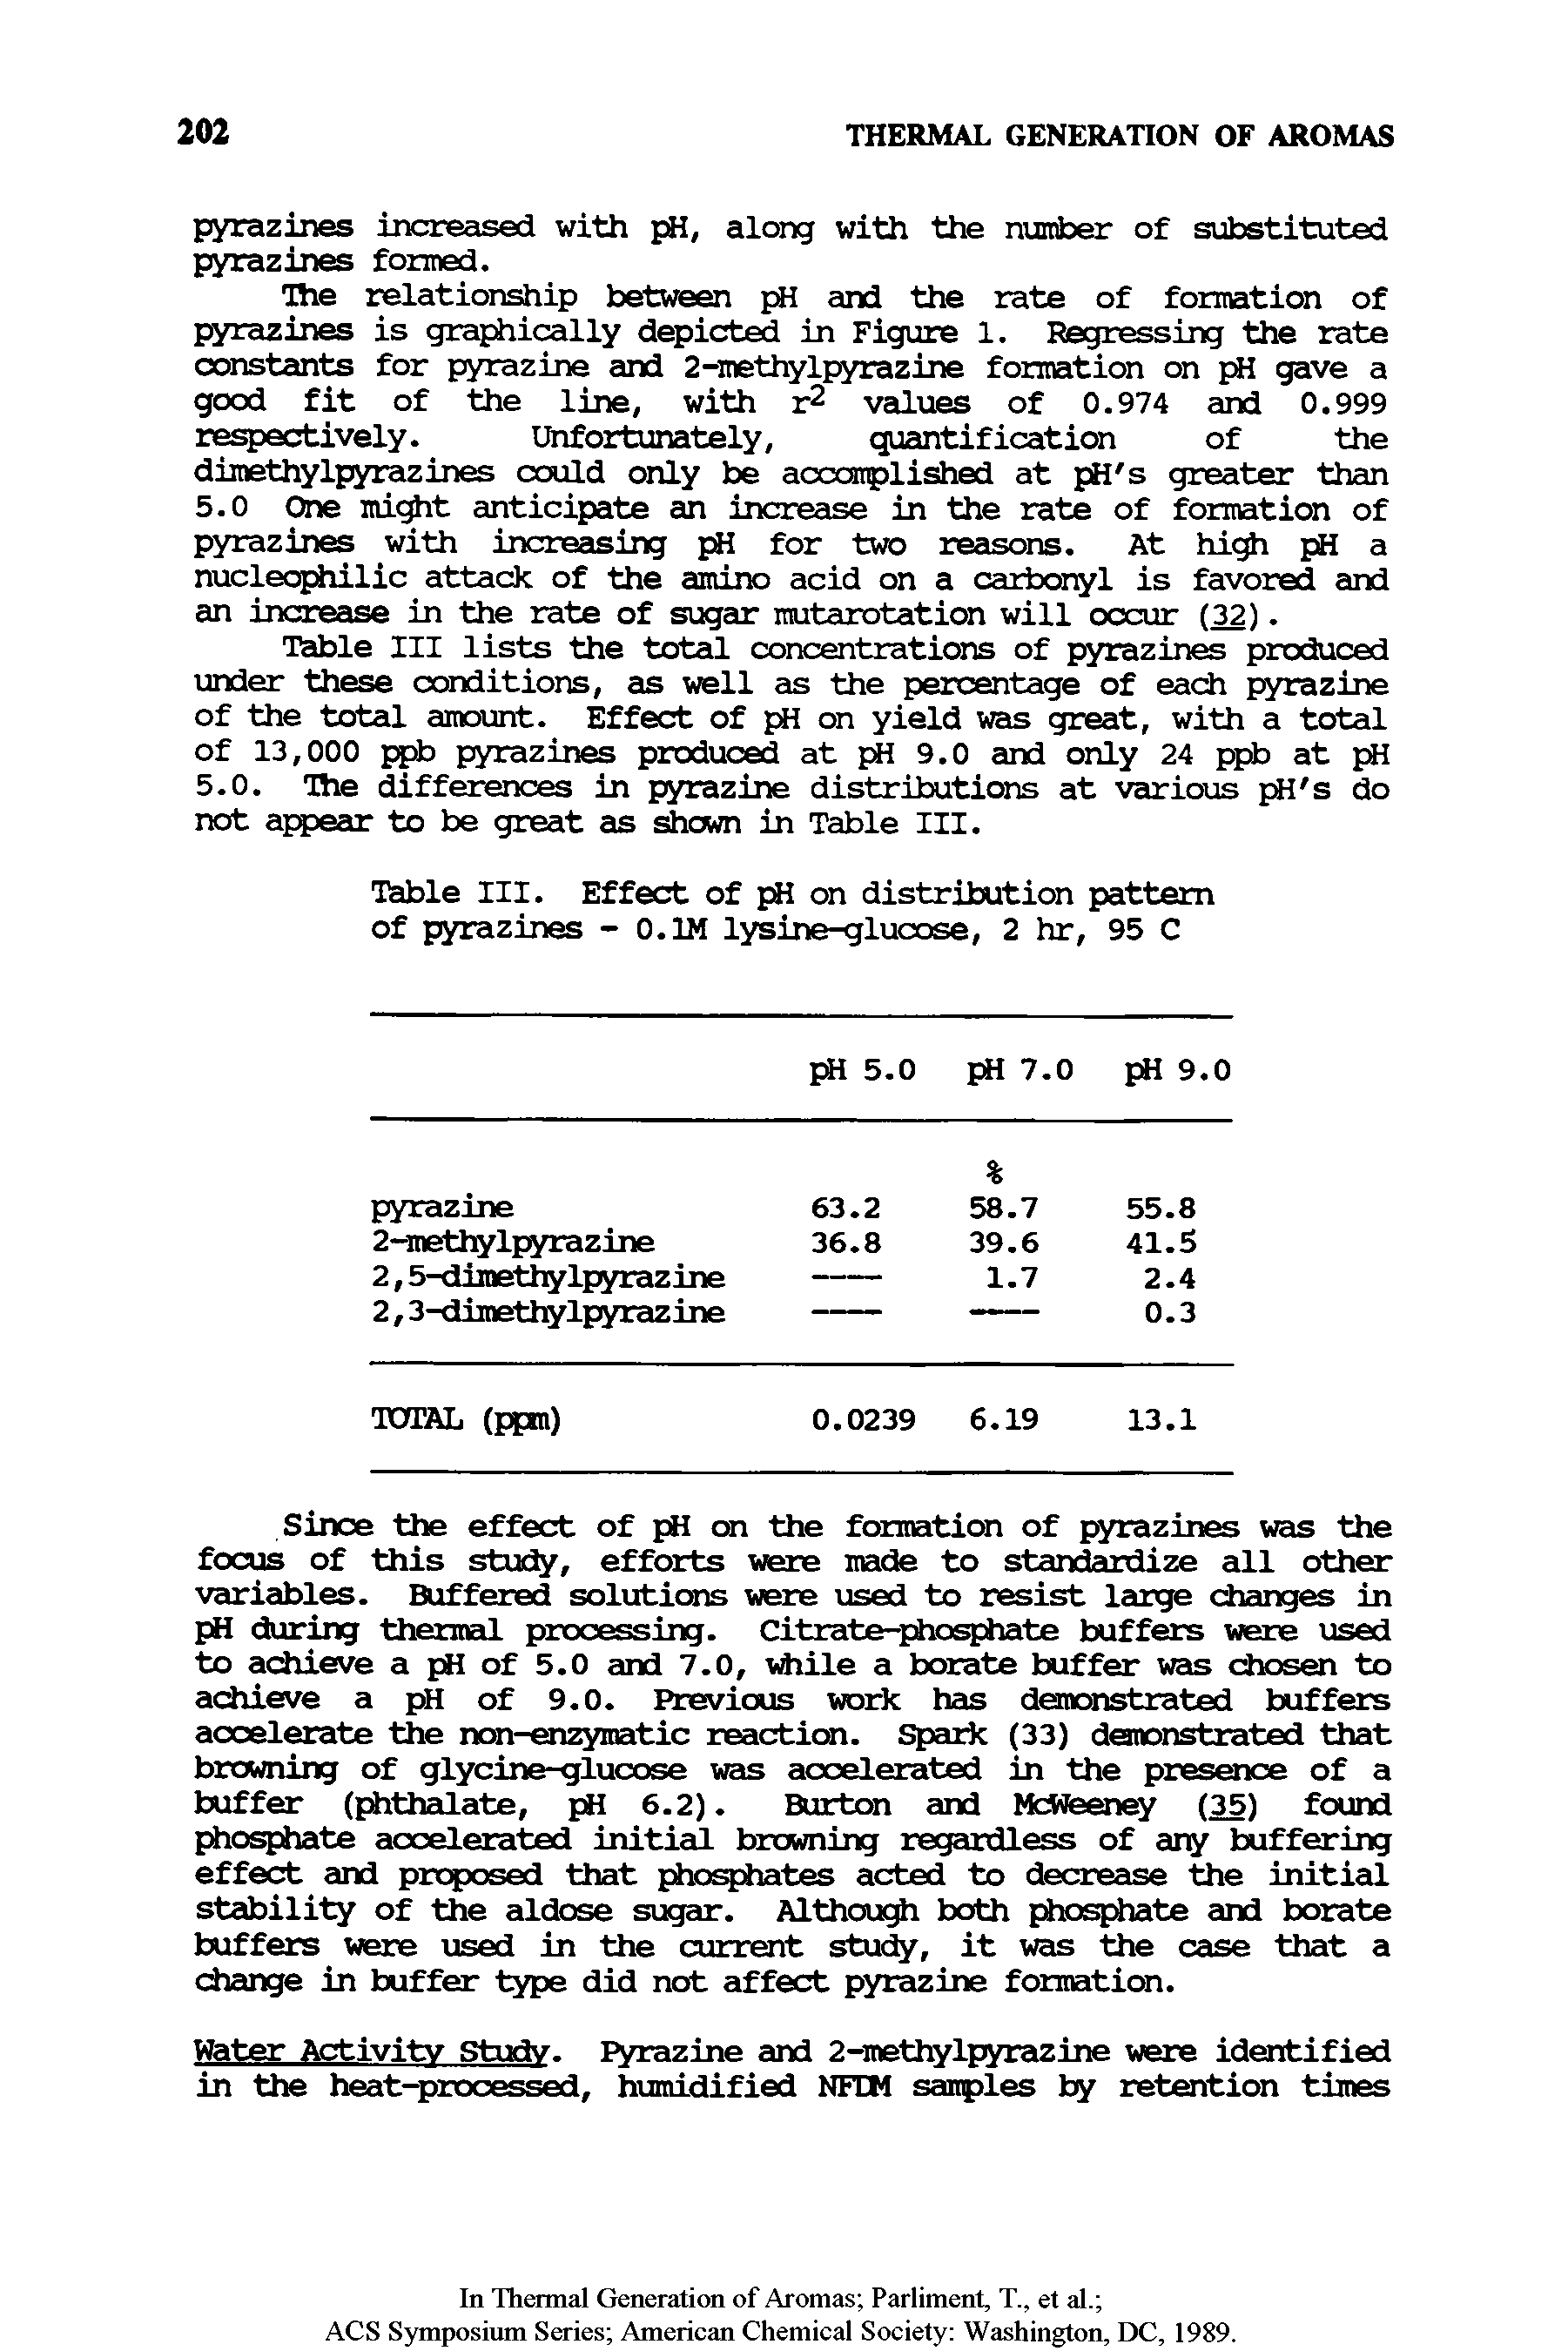 Table III lists the total concentrations of pyrazines produced under these conditions, as well as the percentage of each pyrazine of the total amount. Effect of pH on yield was great, with a total of 13,000 ppb pyrazines produced at pH 9.0 and only 24 ppb at pH 5.0. The differences in pyrazine distributions at various pH s do not appear to be great as shewn in Table III.